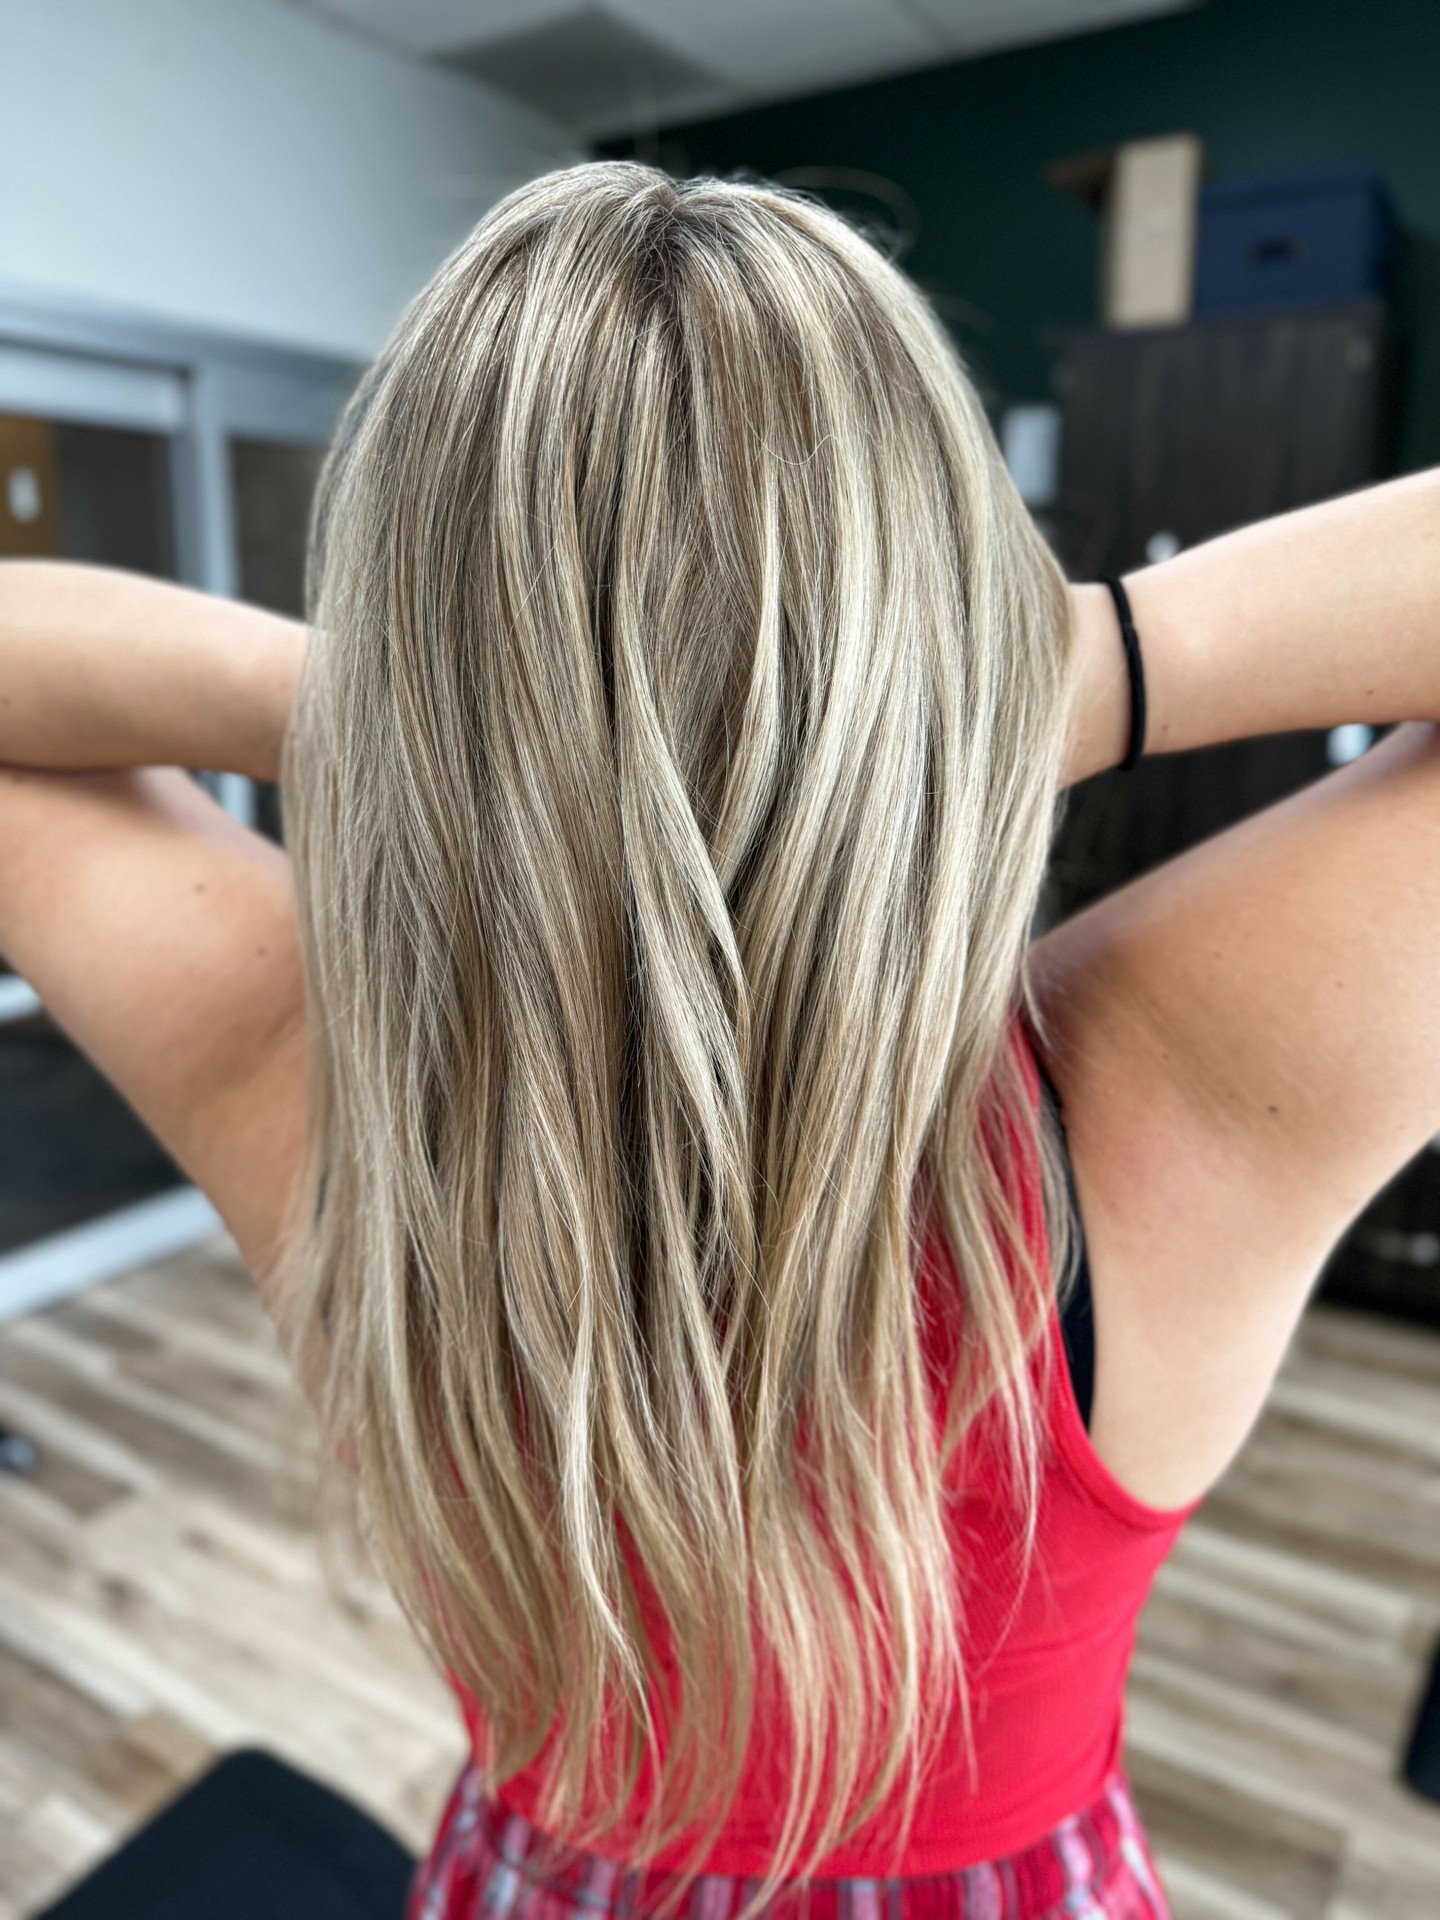 Are you ready to brighten up your look? 💁&zwj;♀️ Our talented stylists at The Process Salon are here to help you achieve the perfect blonde highlights that will make heads turn! 💇&zwj;♀️

We understand that choosing the right shade of blonde can be